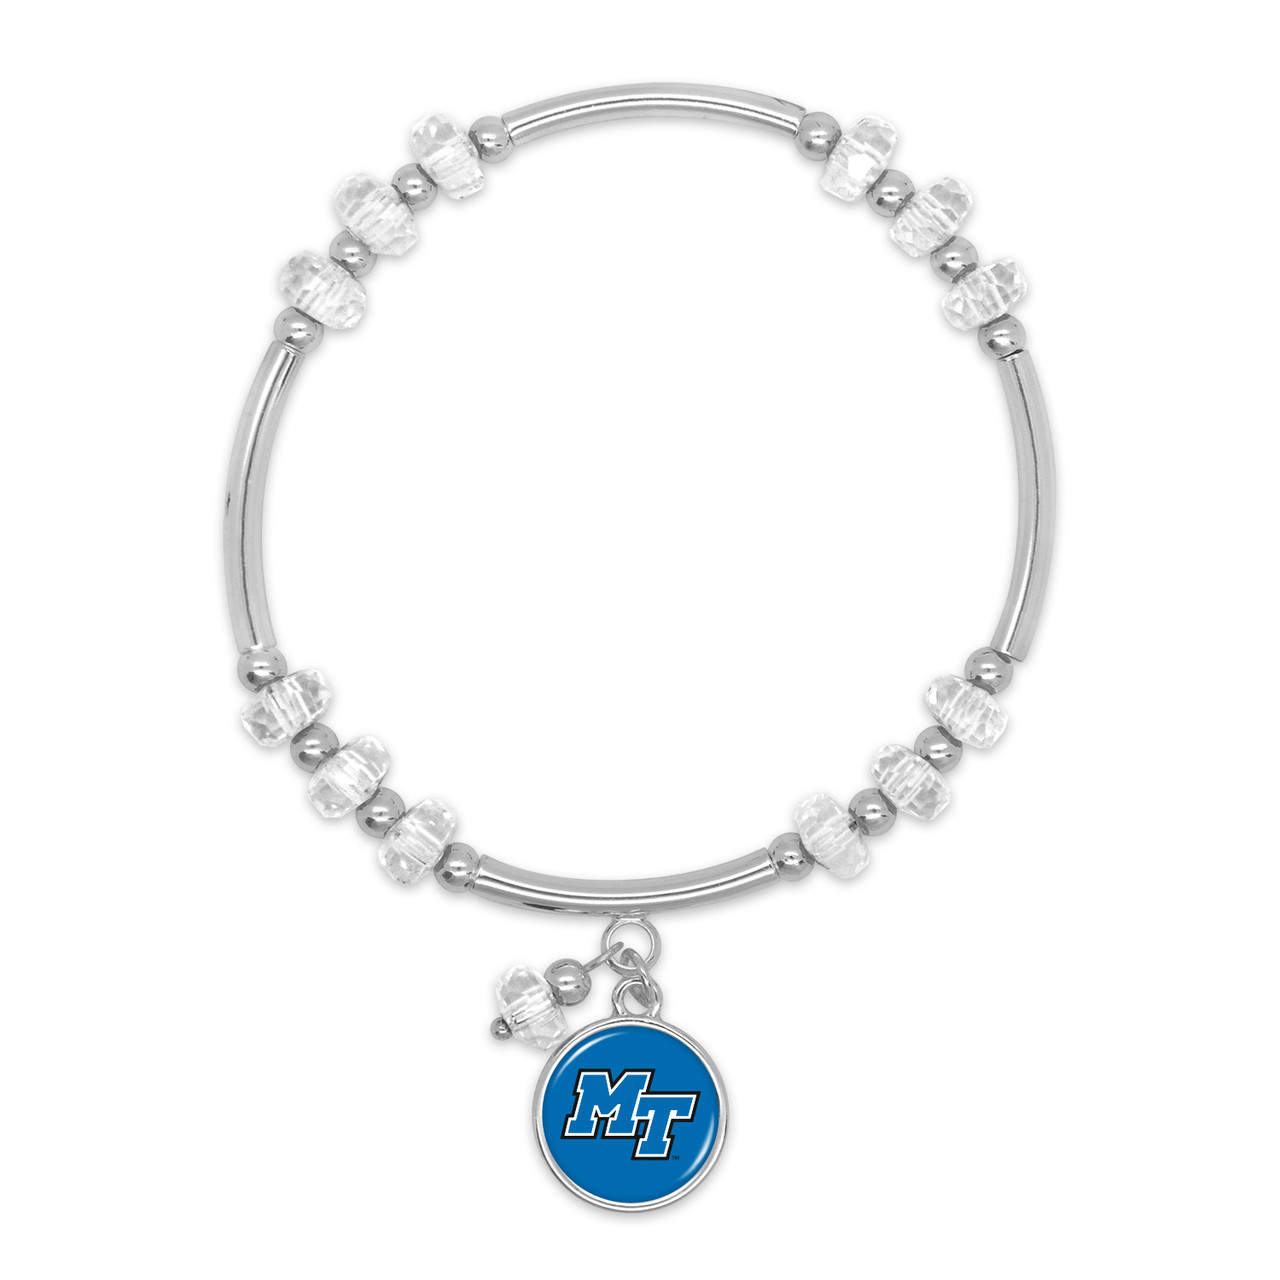 Middle Tennessee State Bracelet - Ivy